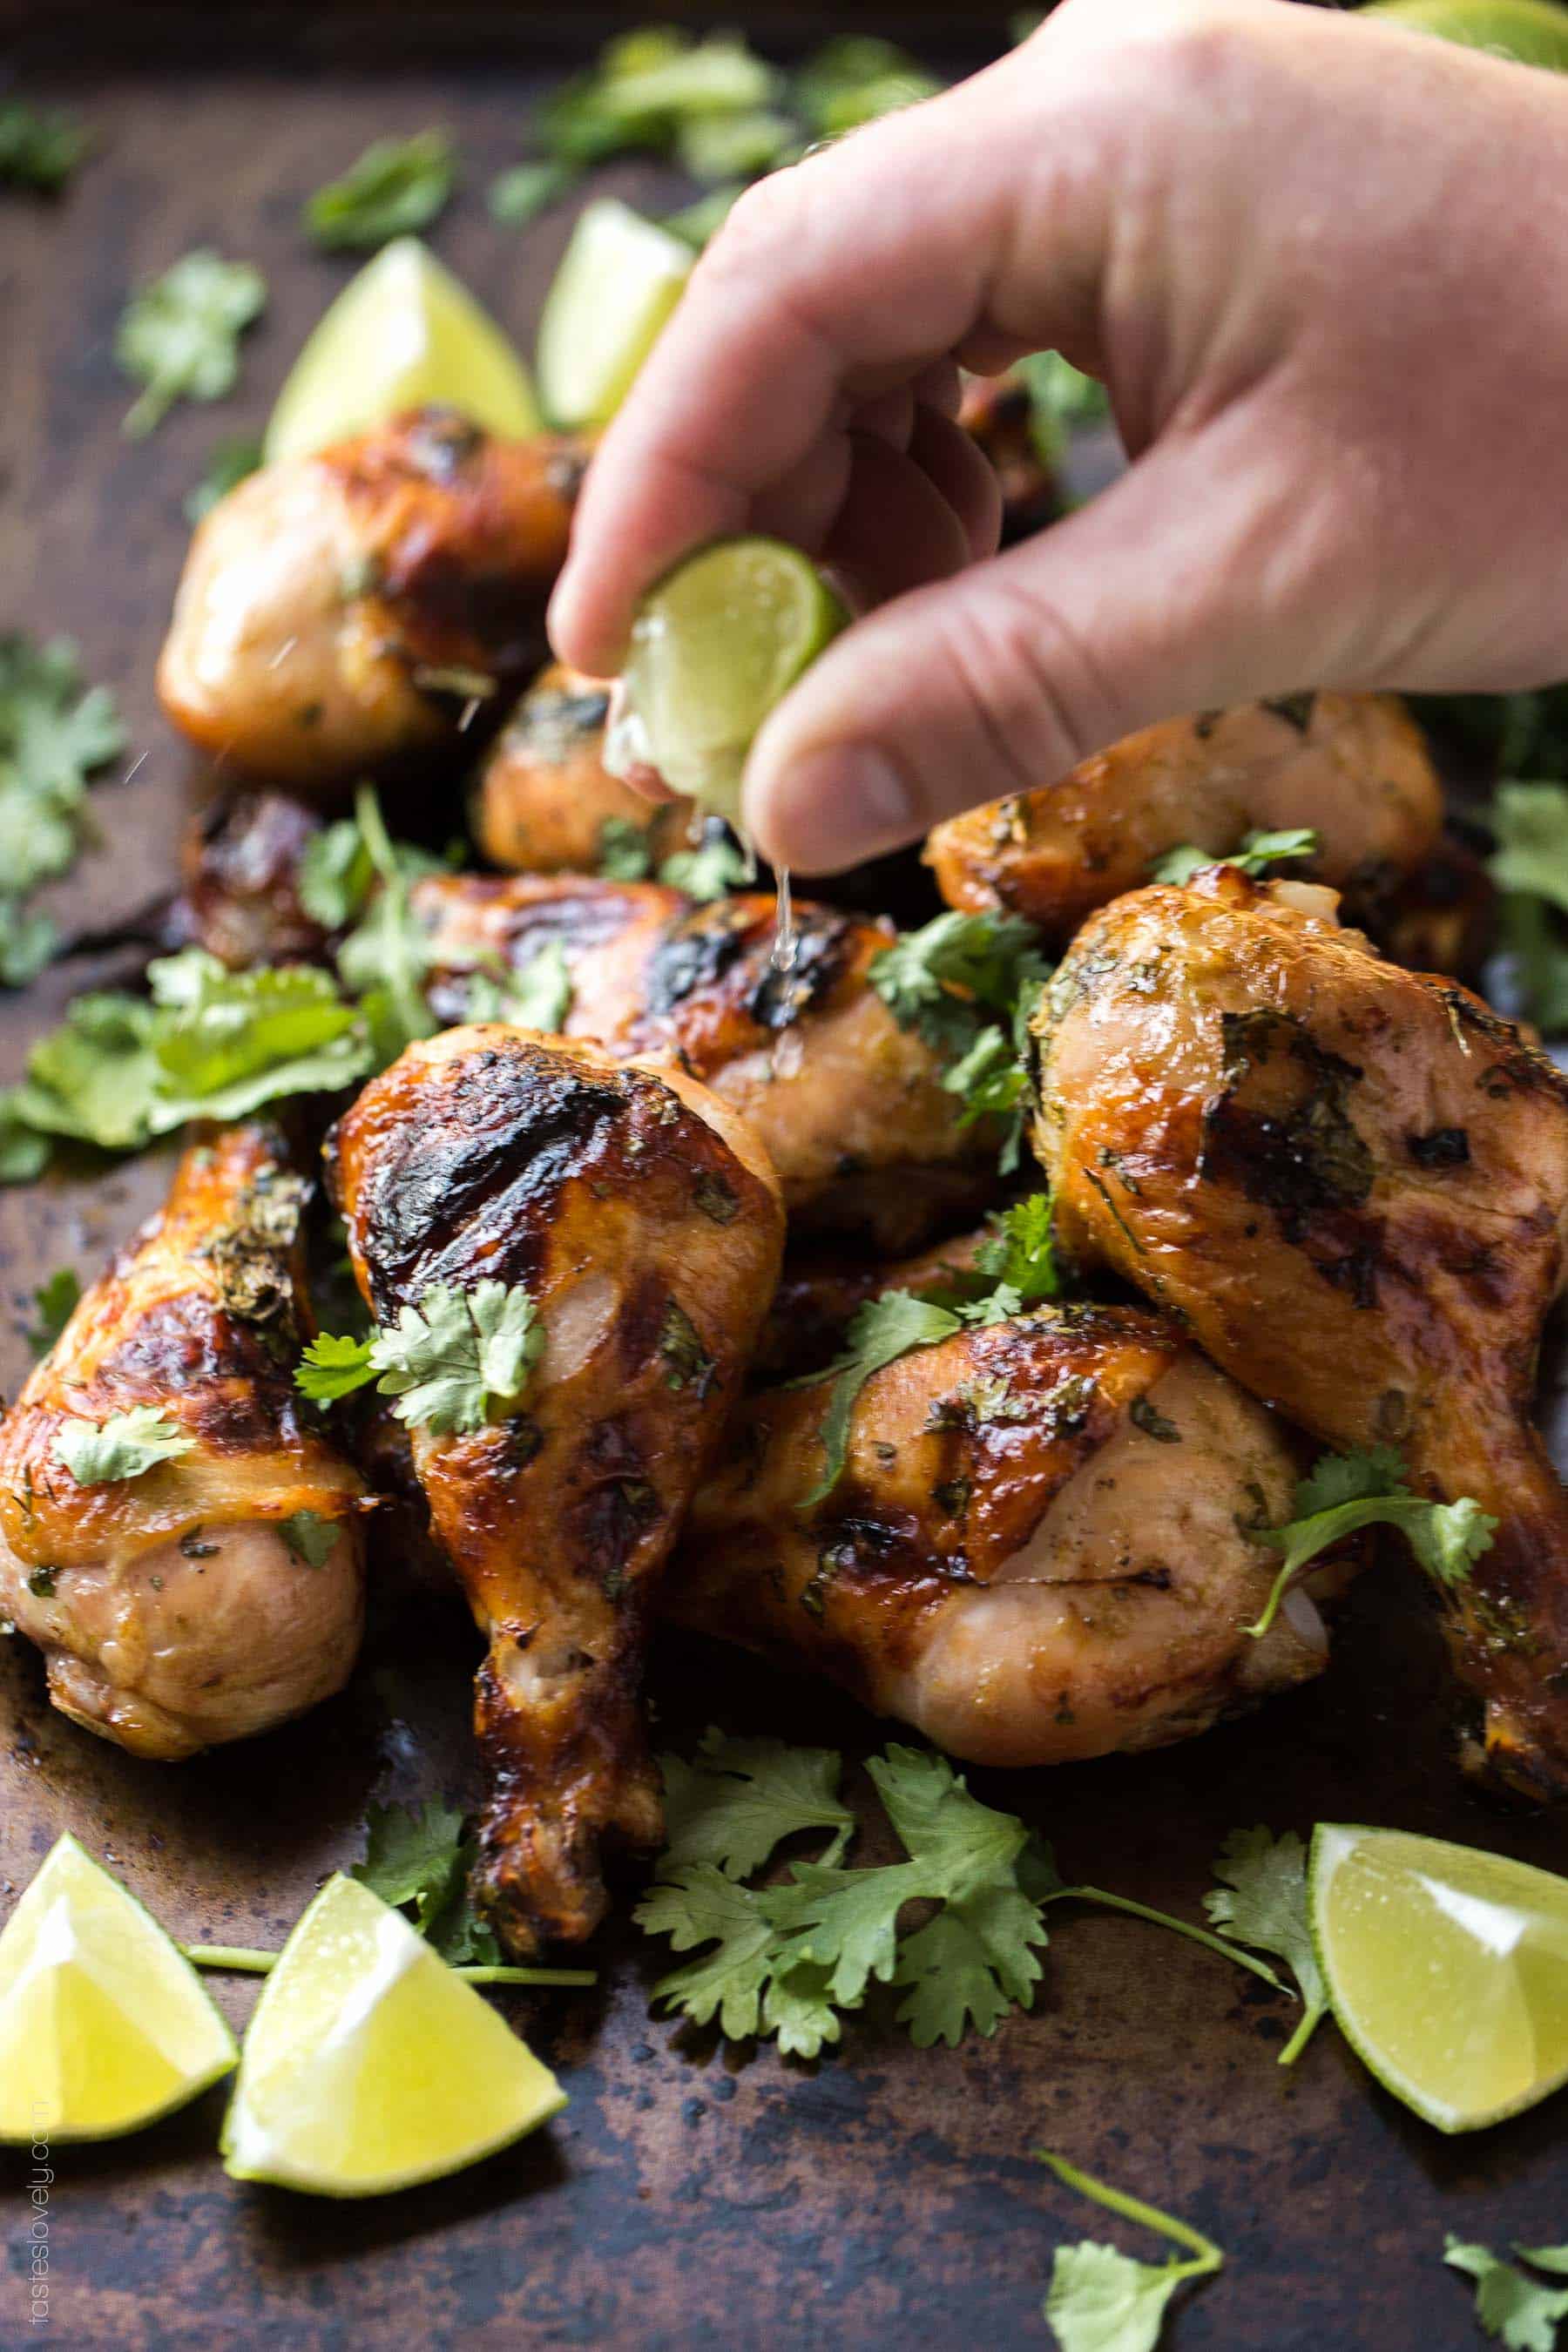 Paleo Cilantro Honey Lime Chicken Drumsticks - a delicious and healthy grilled dinner recipe! Paleo, gluten free, grain free, dairy free, refined sugar free.